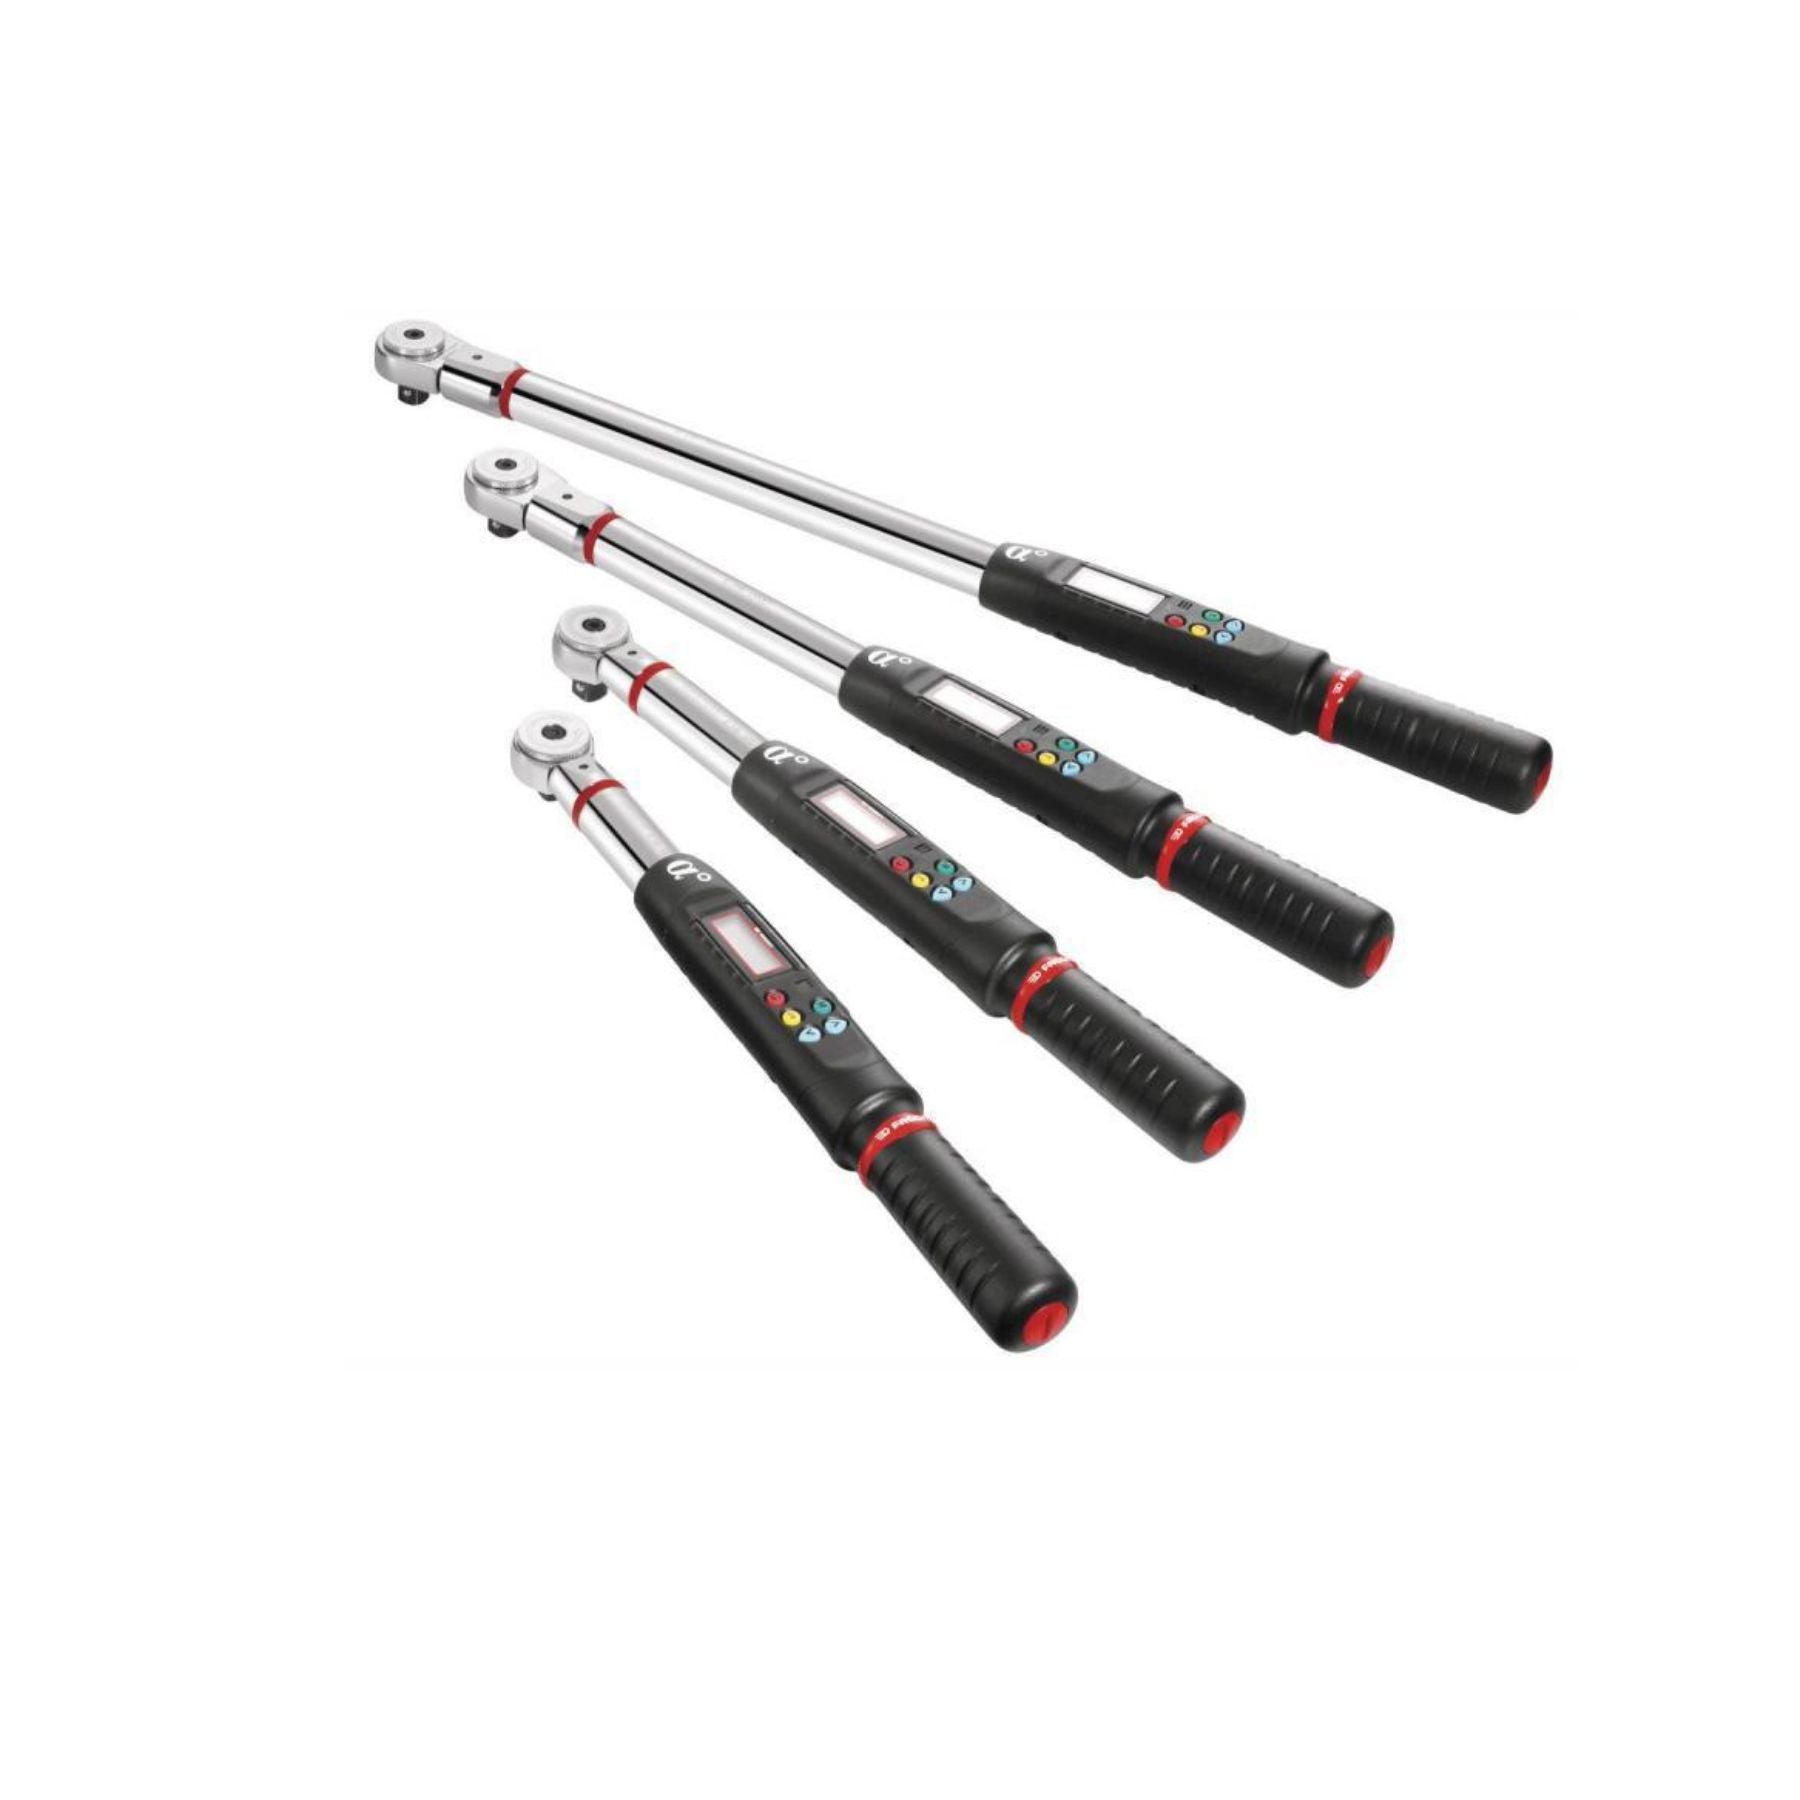 Facom E.306A200S Digital Electronic Torque  wrenches with Rachet, Capacity 10-200, Square 1/2